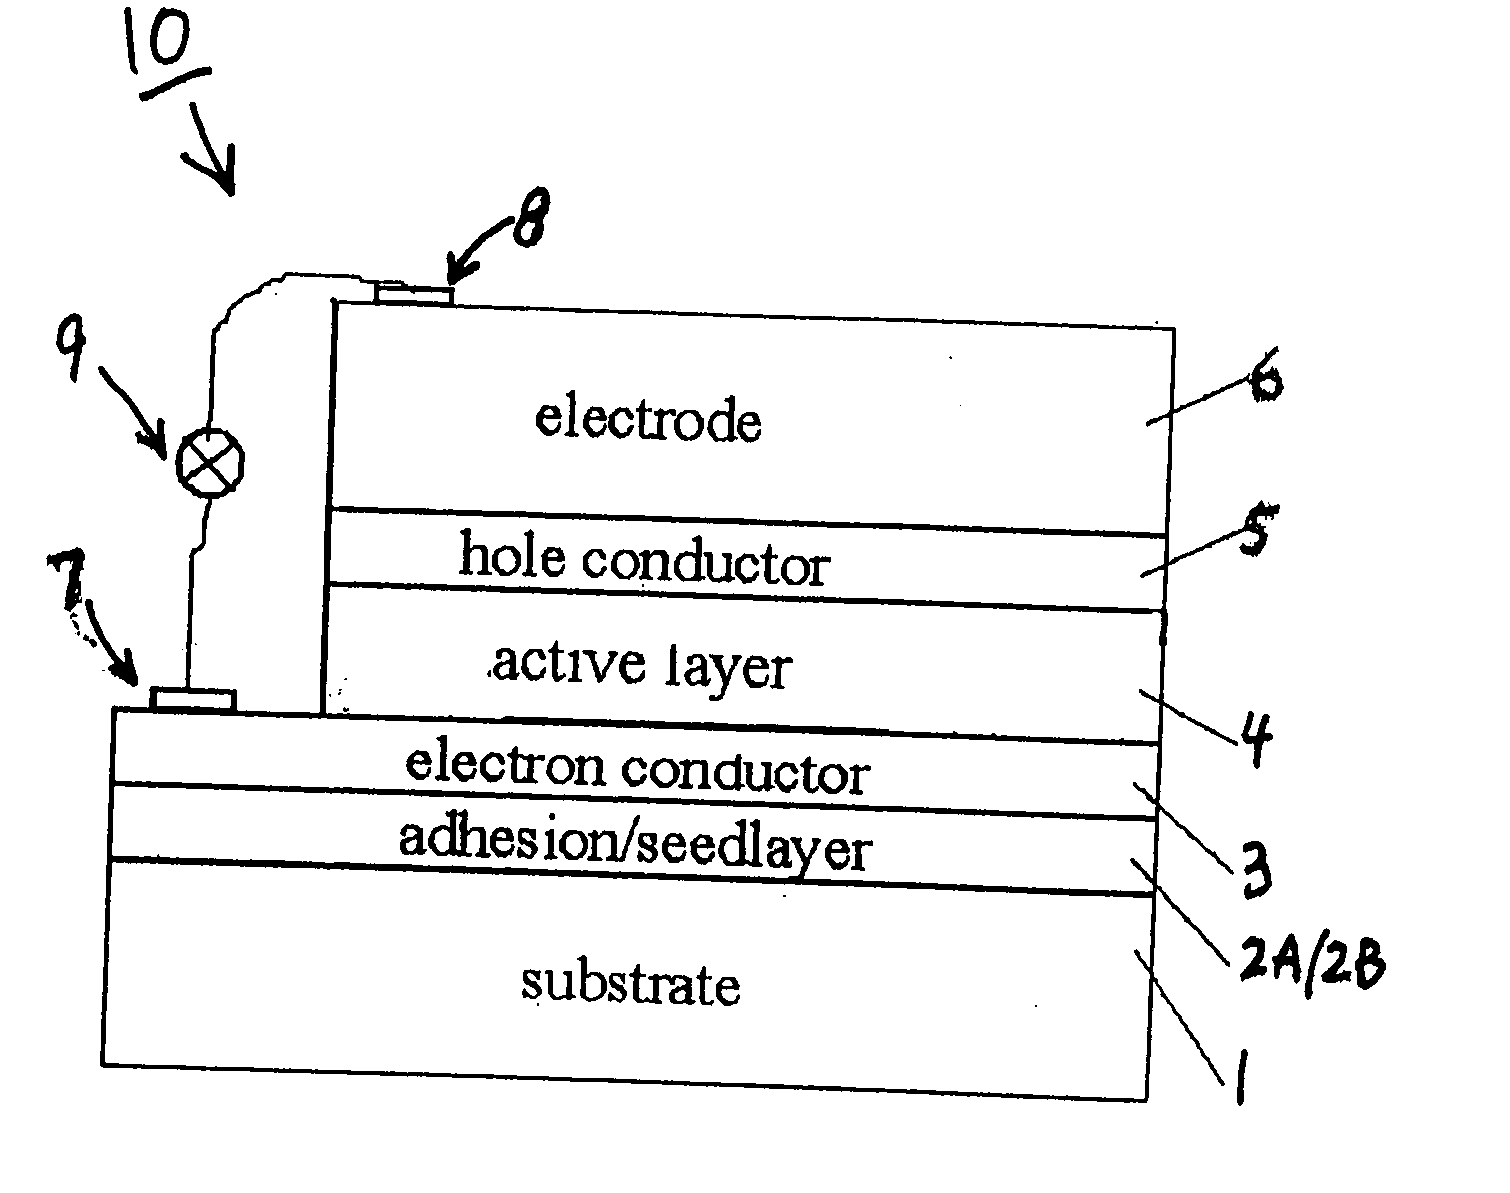 Quantum dot sensitized wide bandgap semiconductor photovoltaic devices & methods of fabricating same